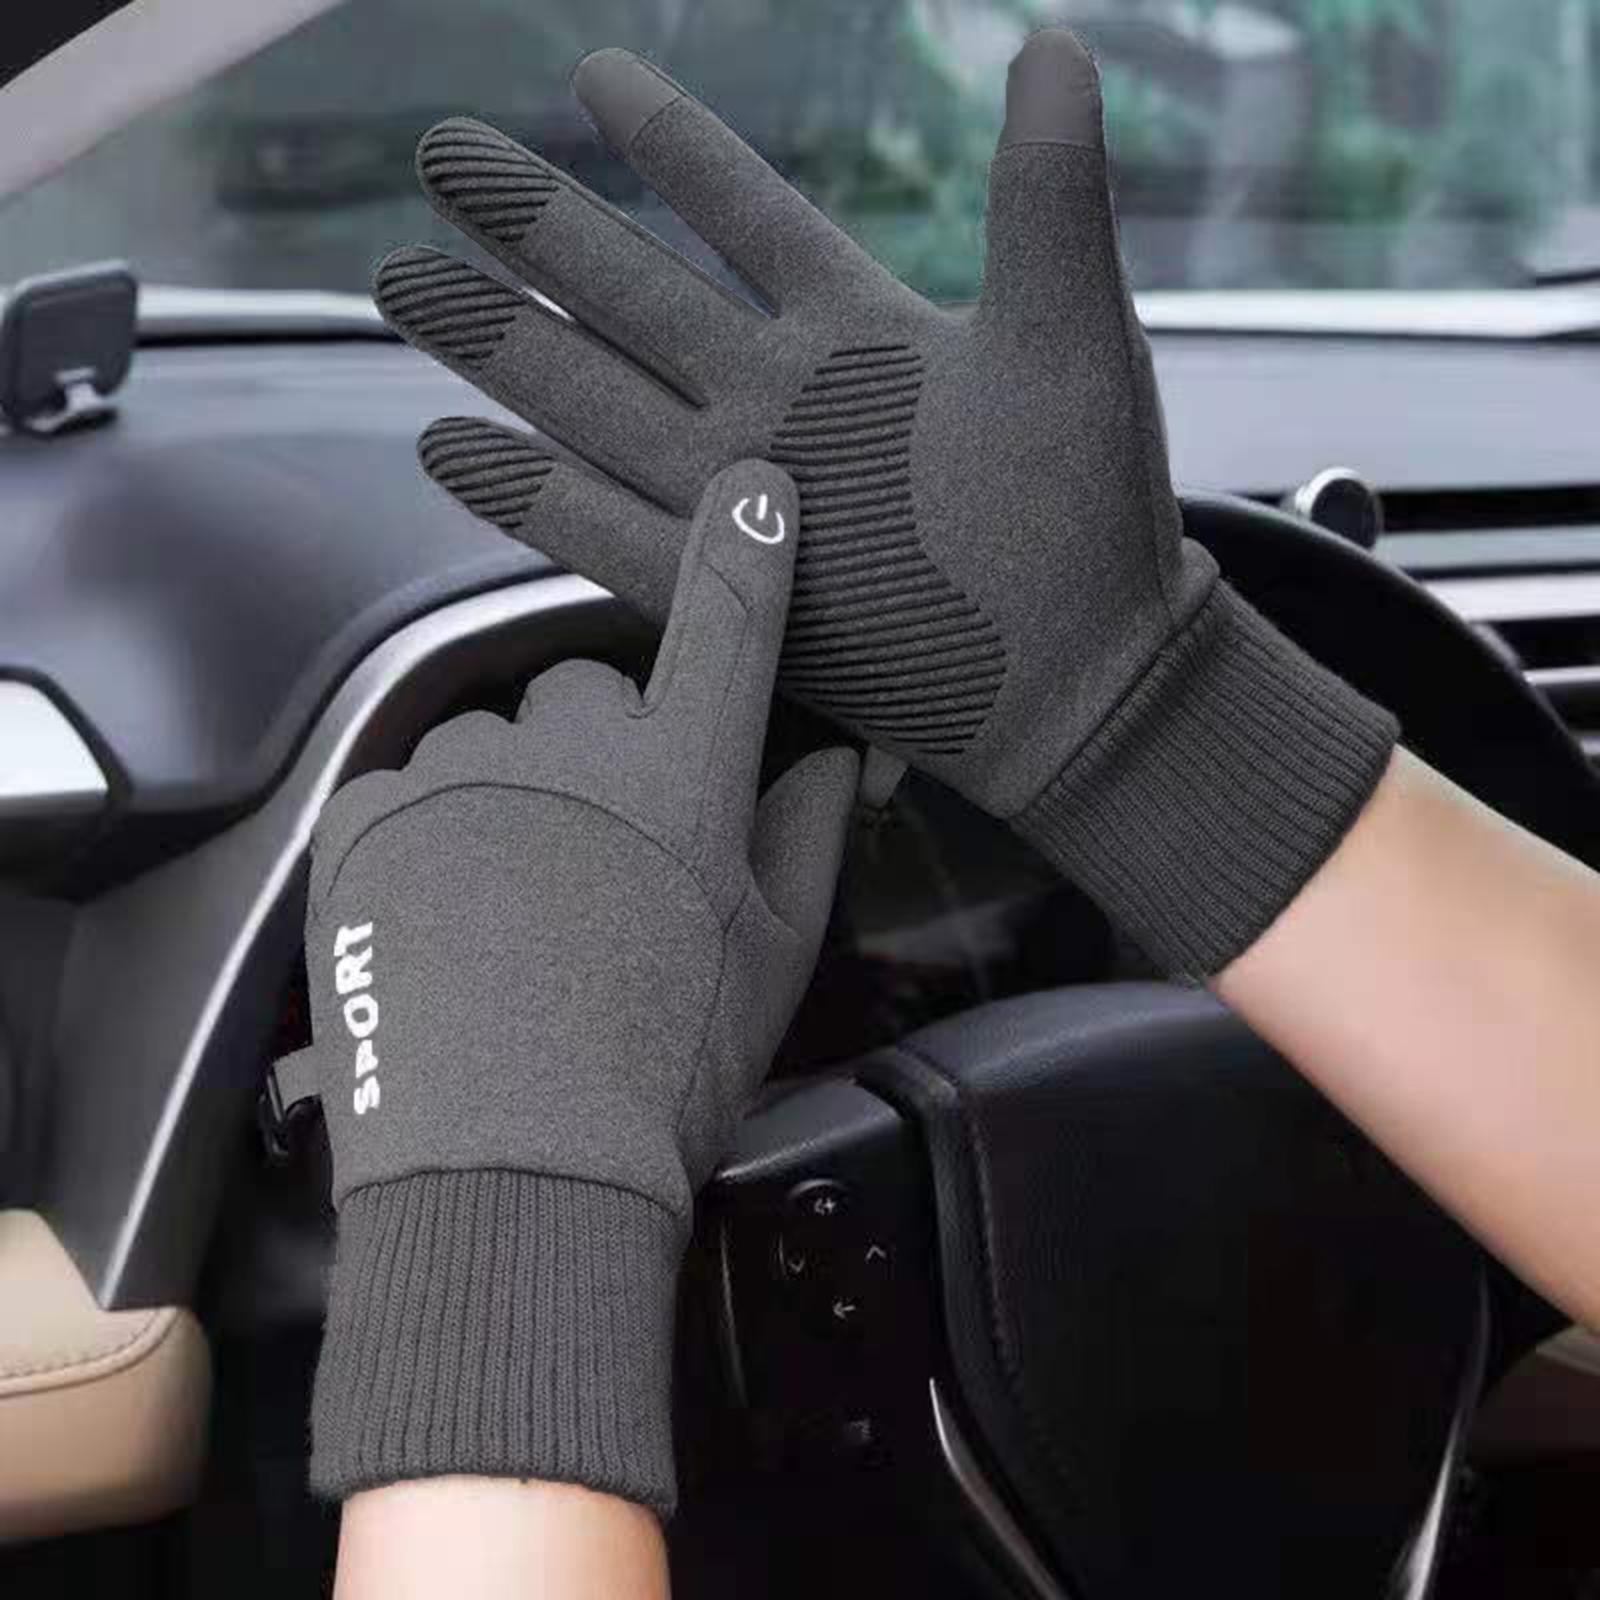 Thermal Gloves Commuting Winter Gloves for Driving Outdoor Sports Riding Deep Gray Medium